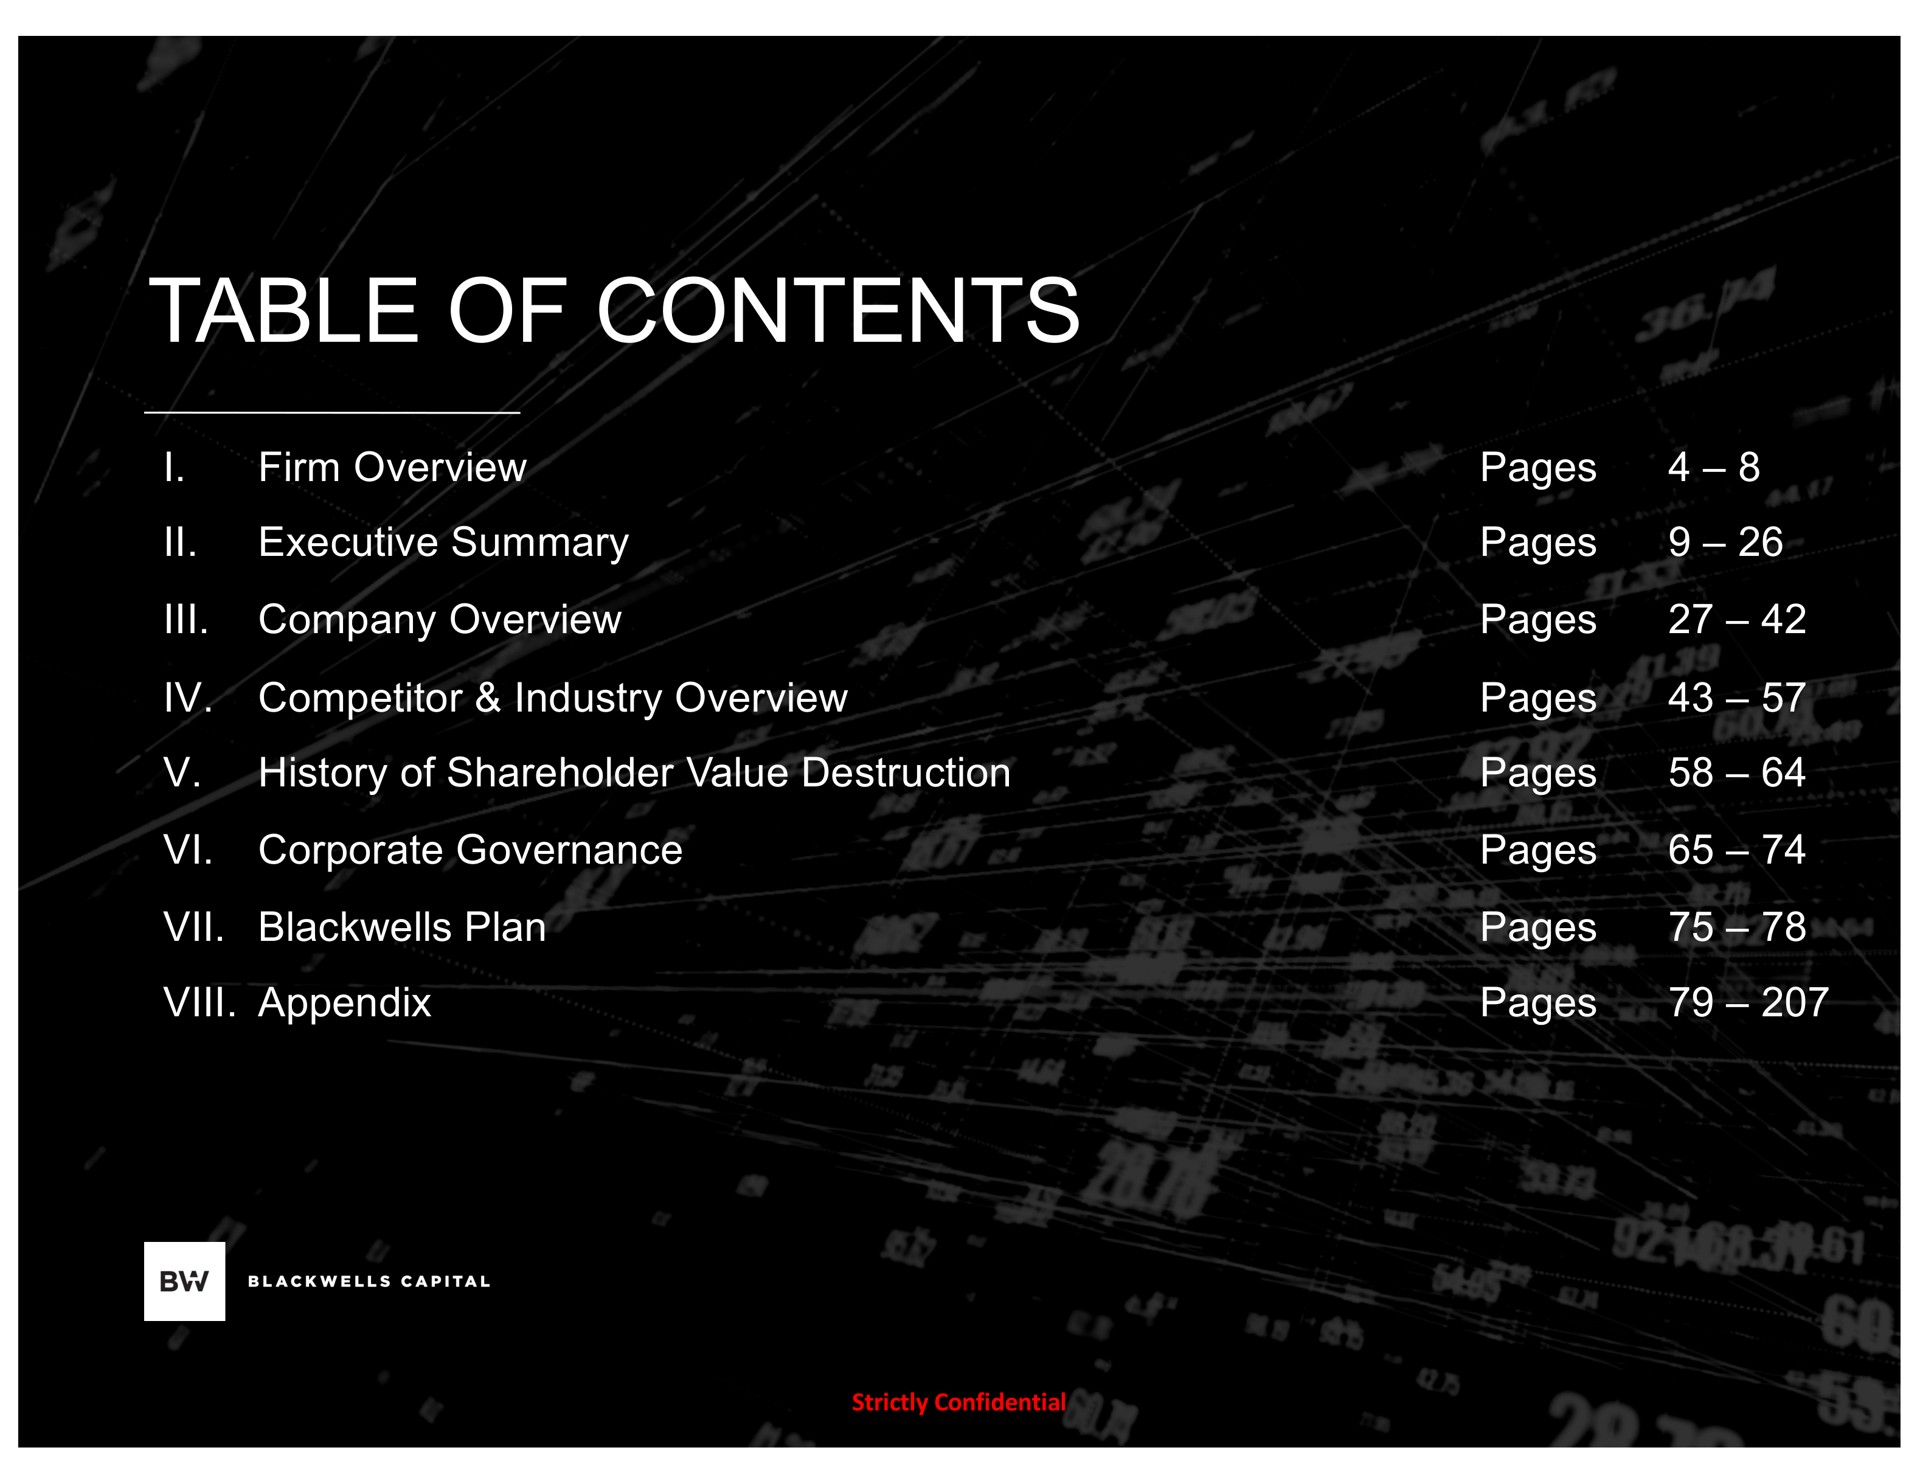 table of contents i firm overview executive summary company overview competitor industry overview history of shareholder value destruction corporate governance plan appendix pages pages pages pages pages pages pages pages | Blackwells Capital